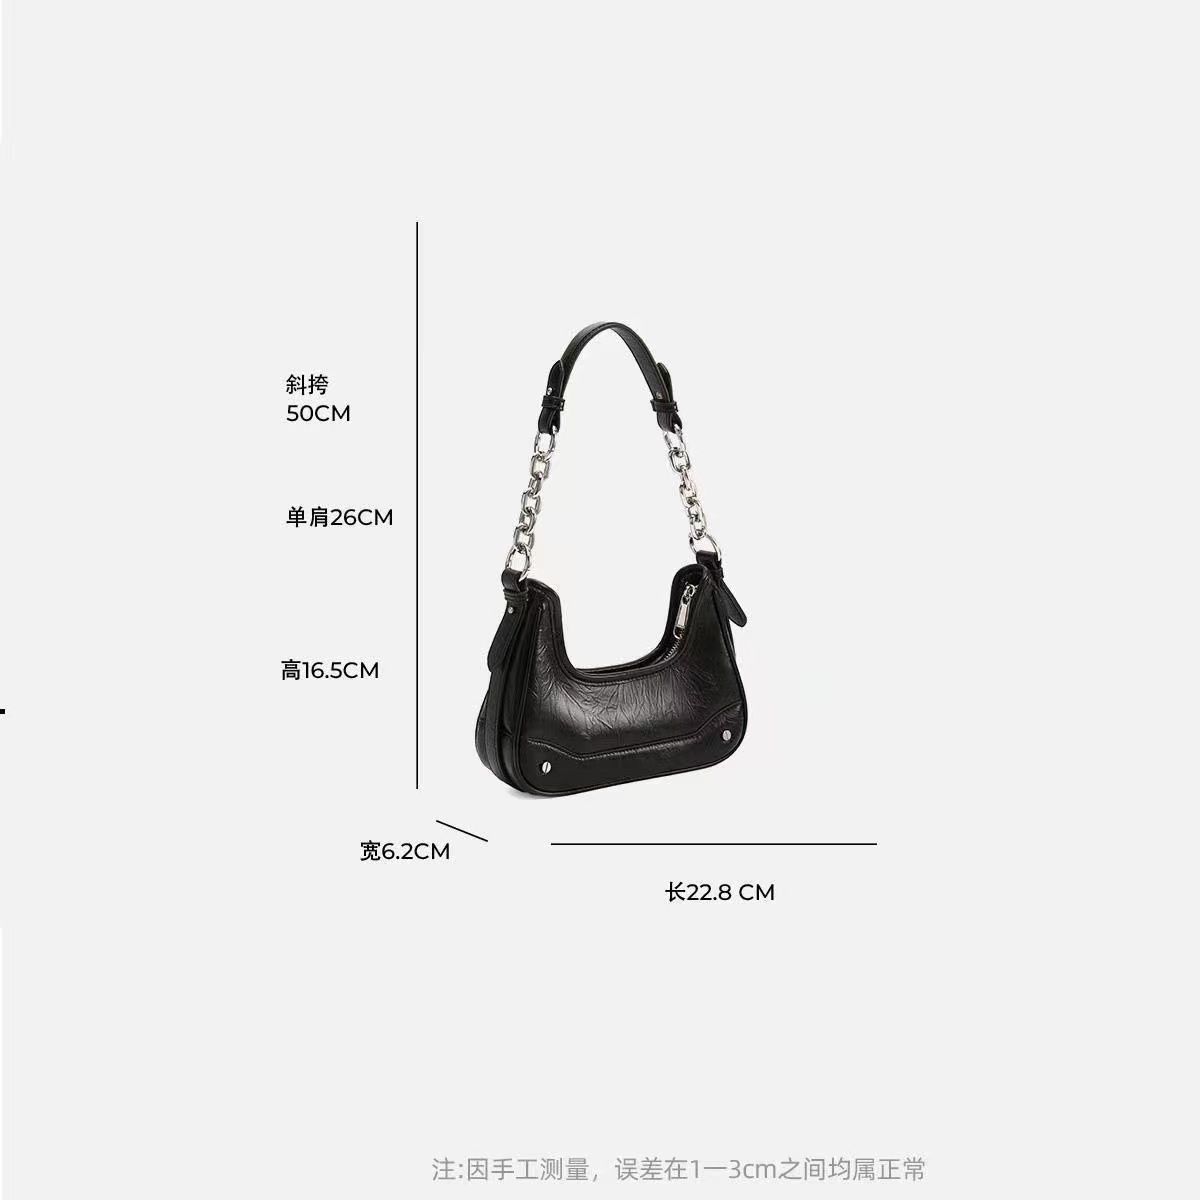 Underarm bag women's summer  new style this year's popular high-end niche chain fashion commuter cross-body baguette bag